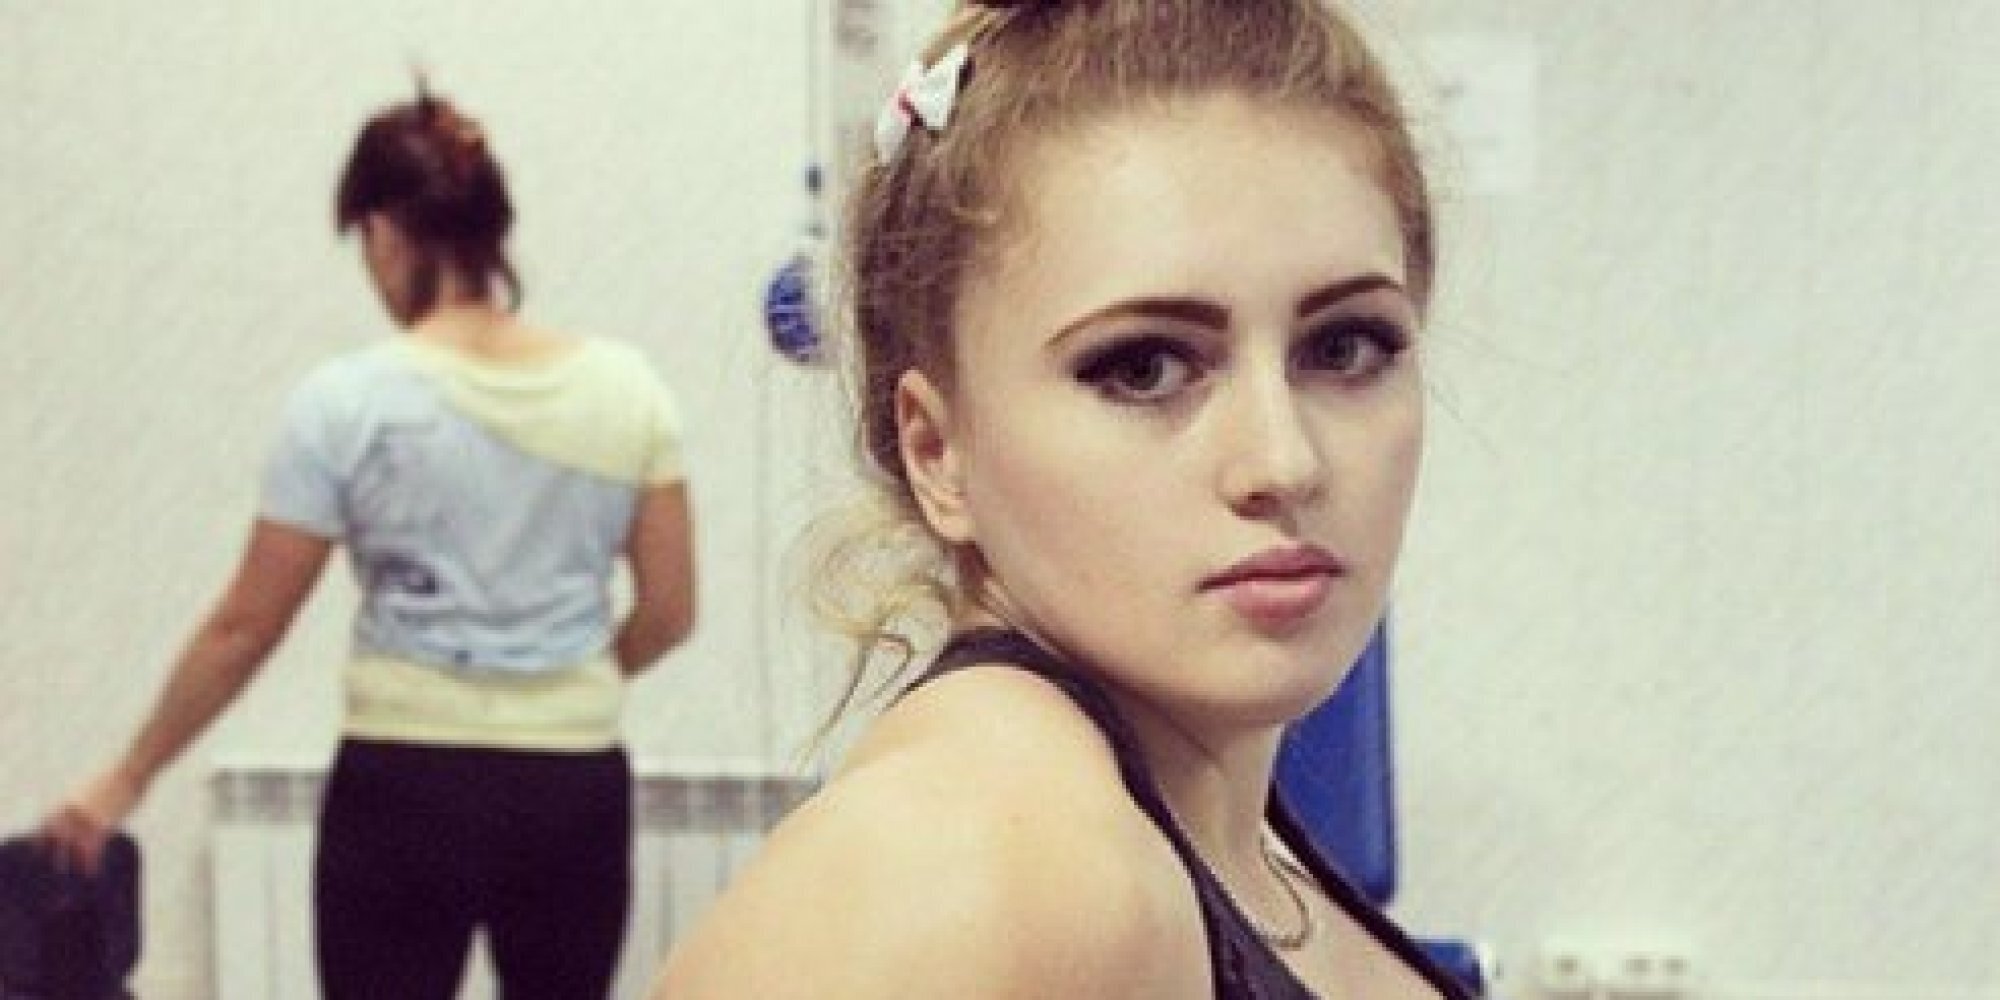 Meet Muscle Barbie Julia Vins The 18 Year Old With A Face Like A Doll Who Can Deadlift